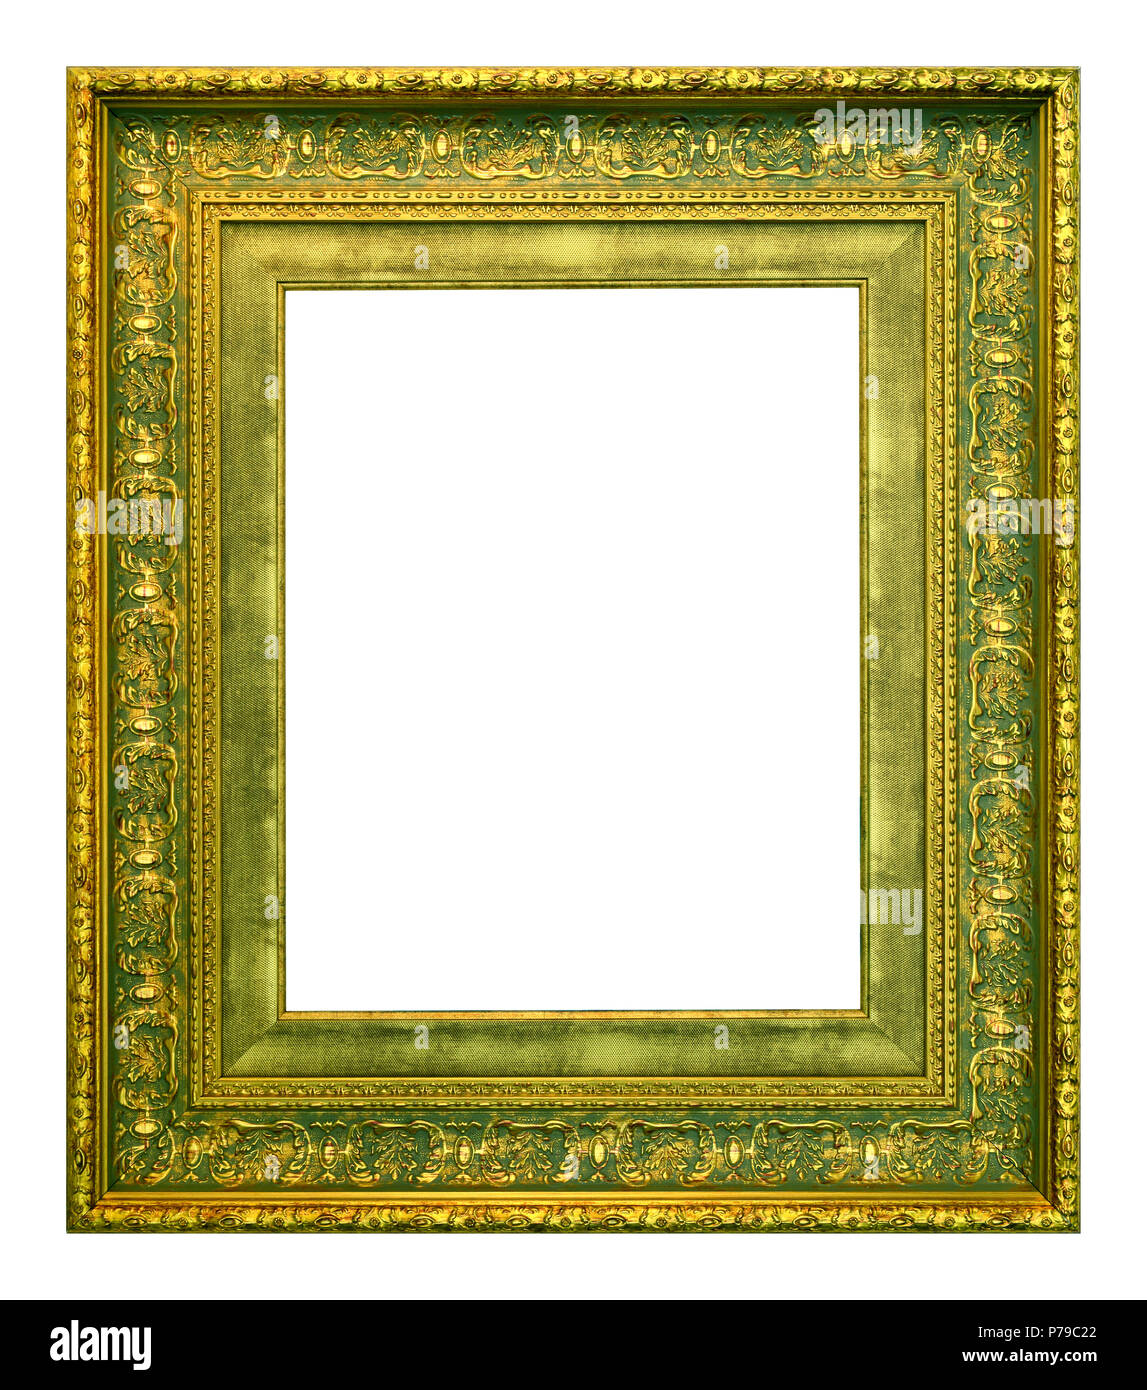 Antique gold frame isolated on the white background vintage style Stock Photo